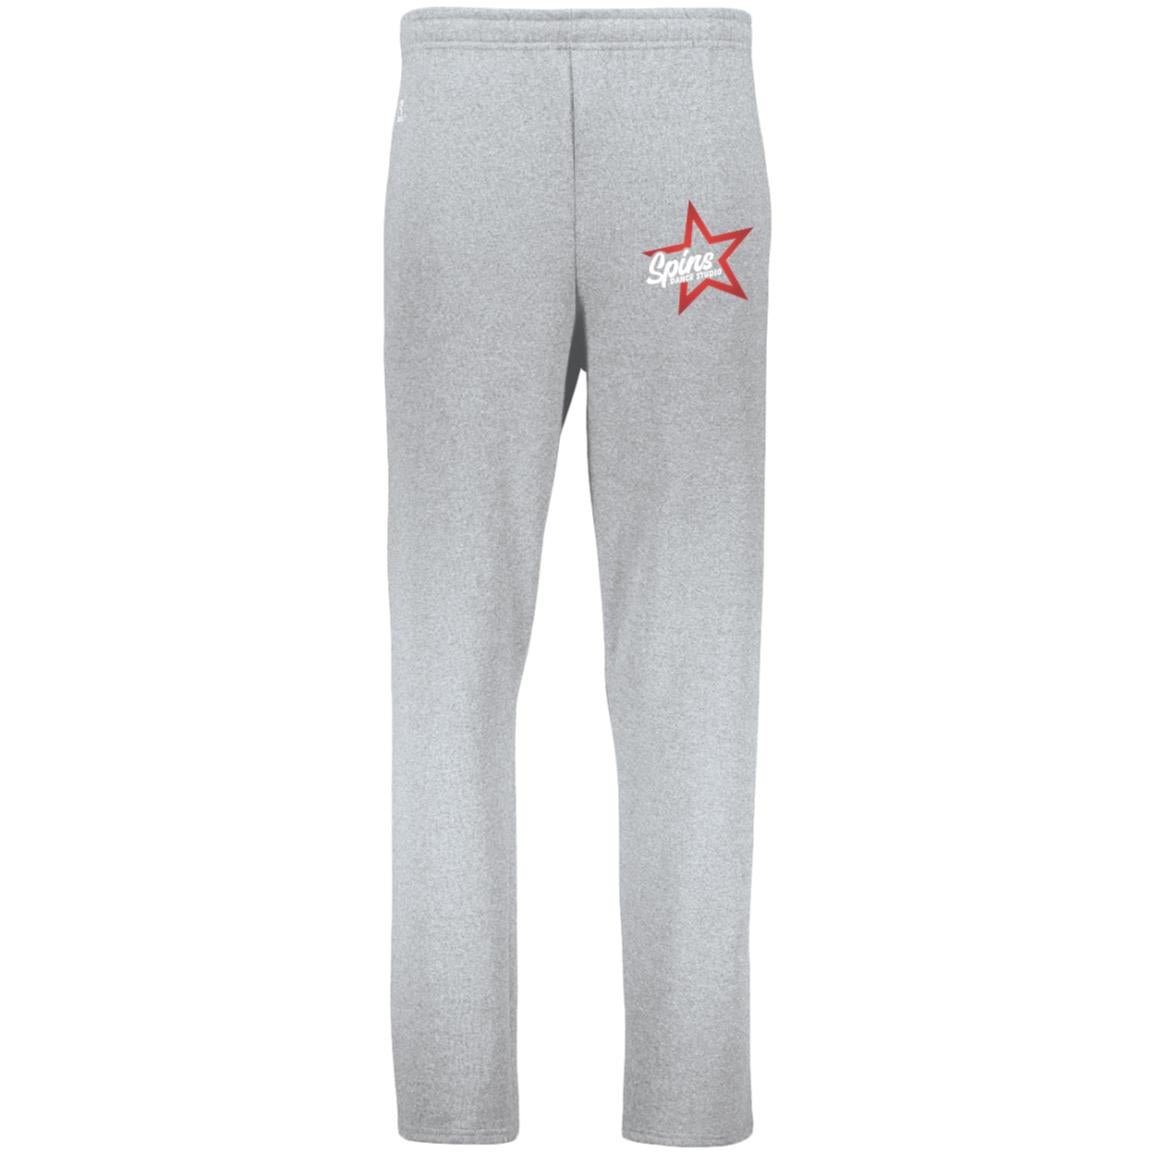 Youth Premium Open Bottom Sweatpants with Pockets